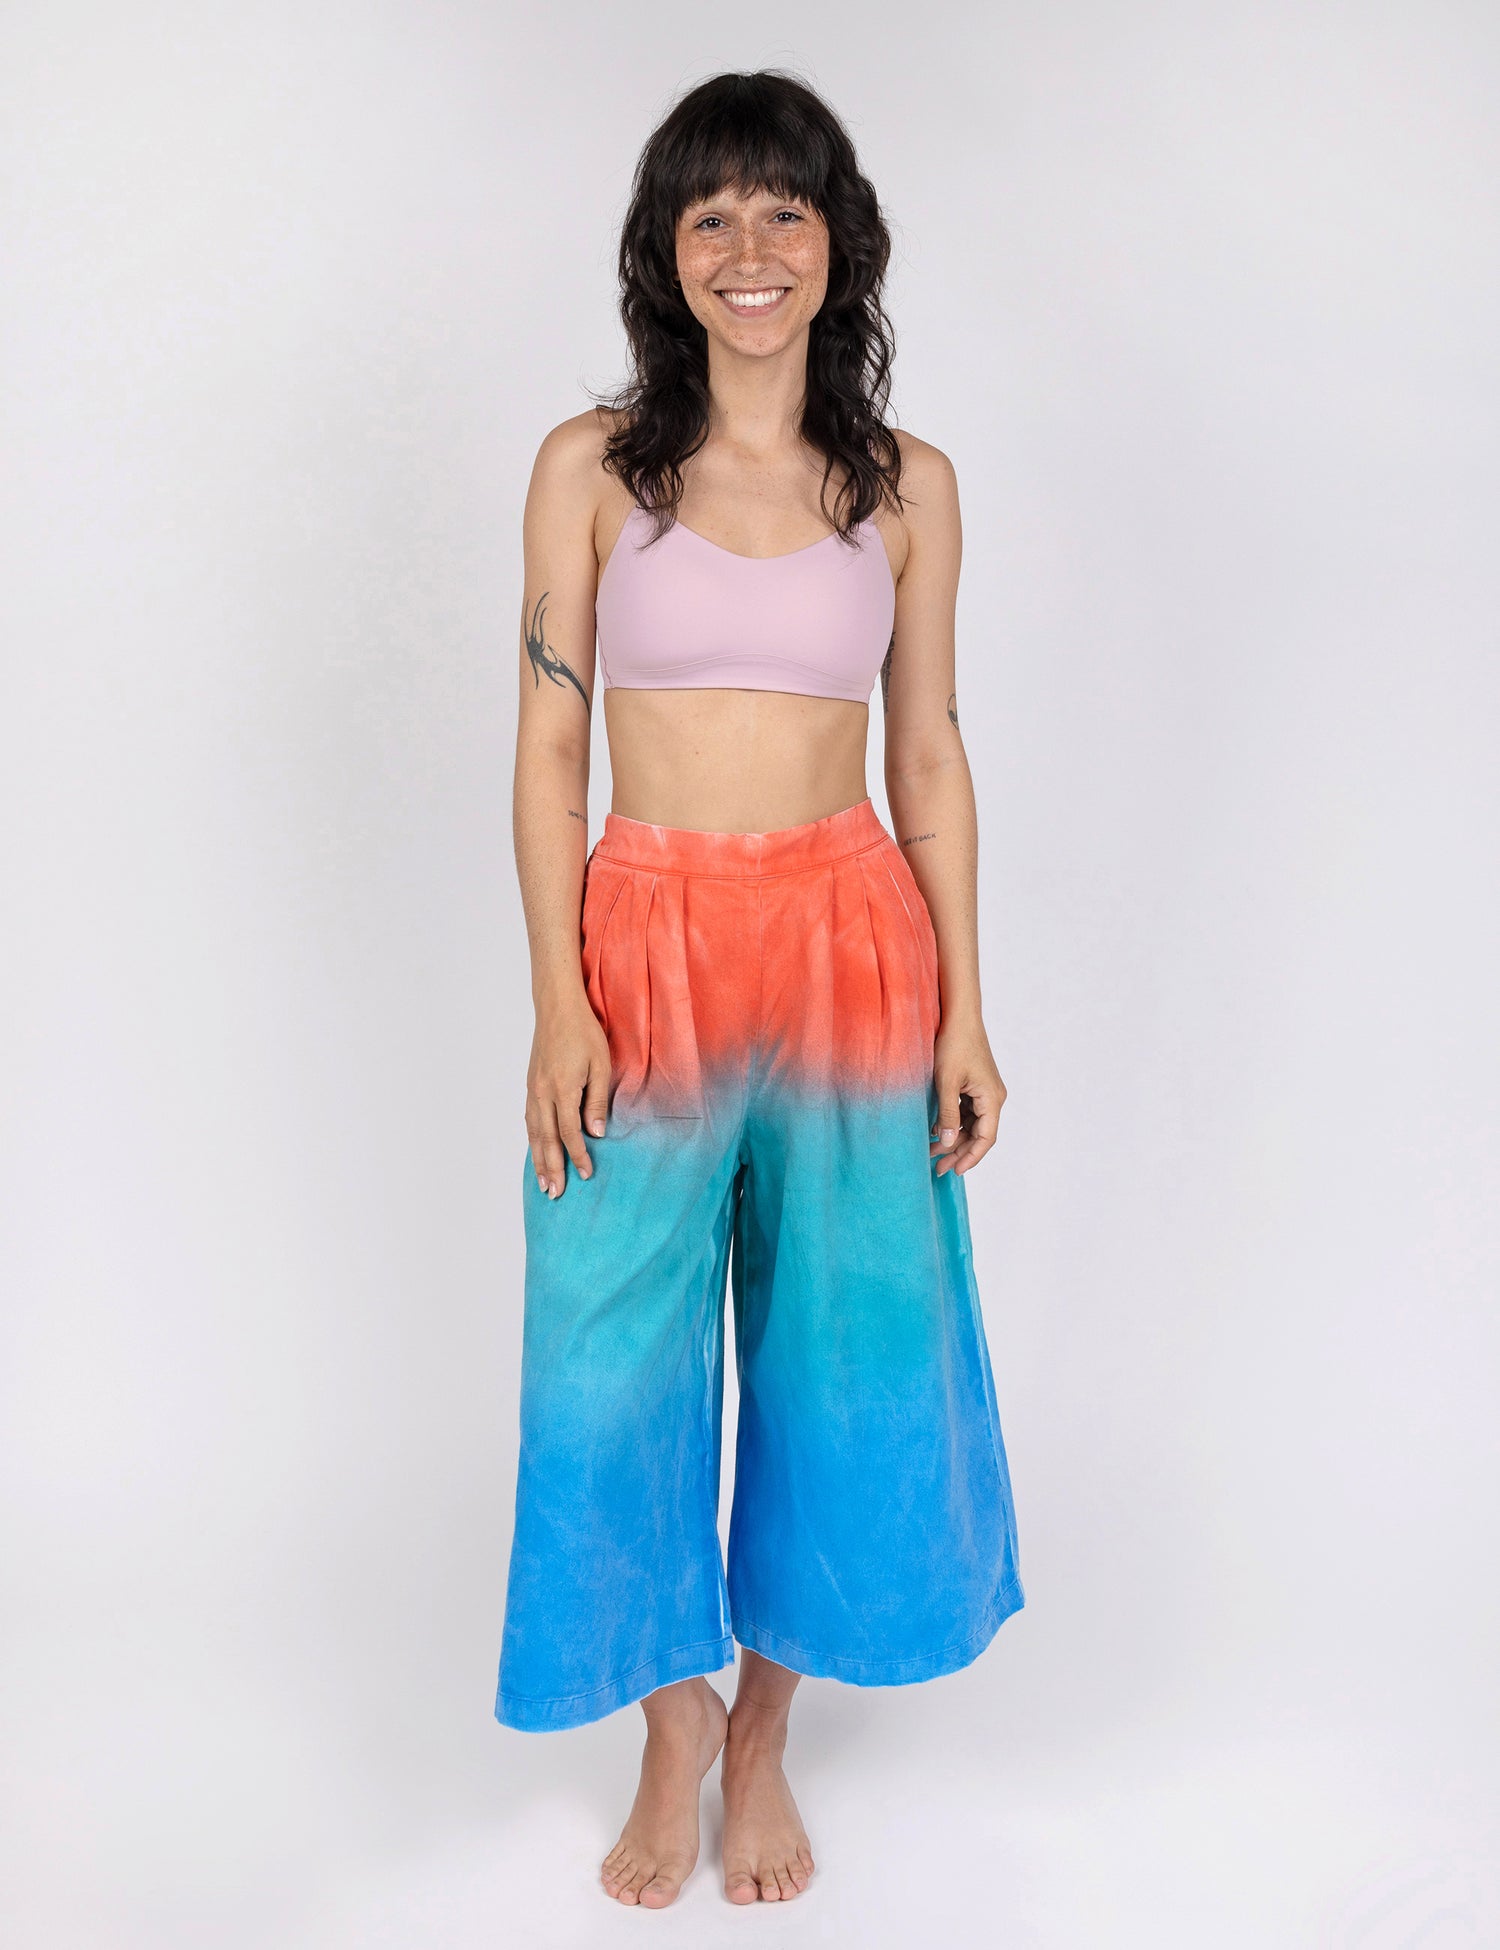 woman wearing culotte pants in gradient design of red teal and blue